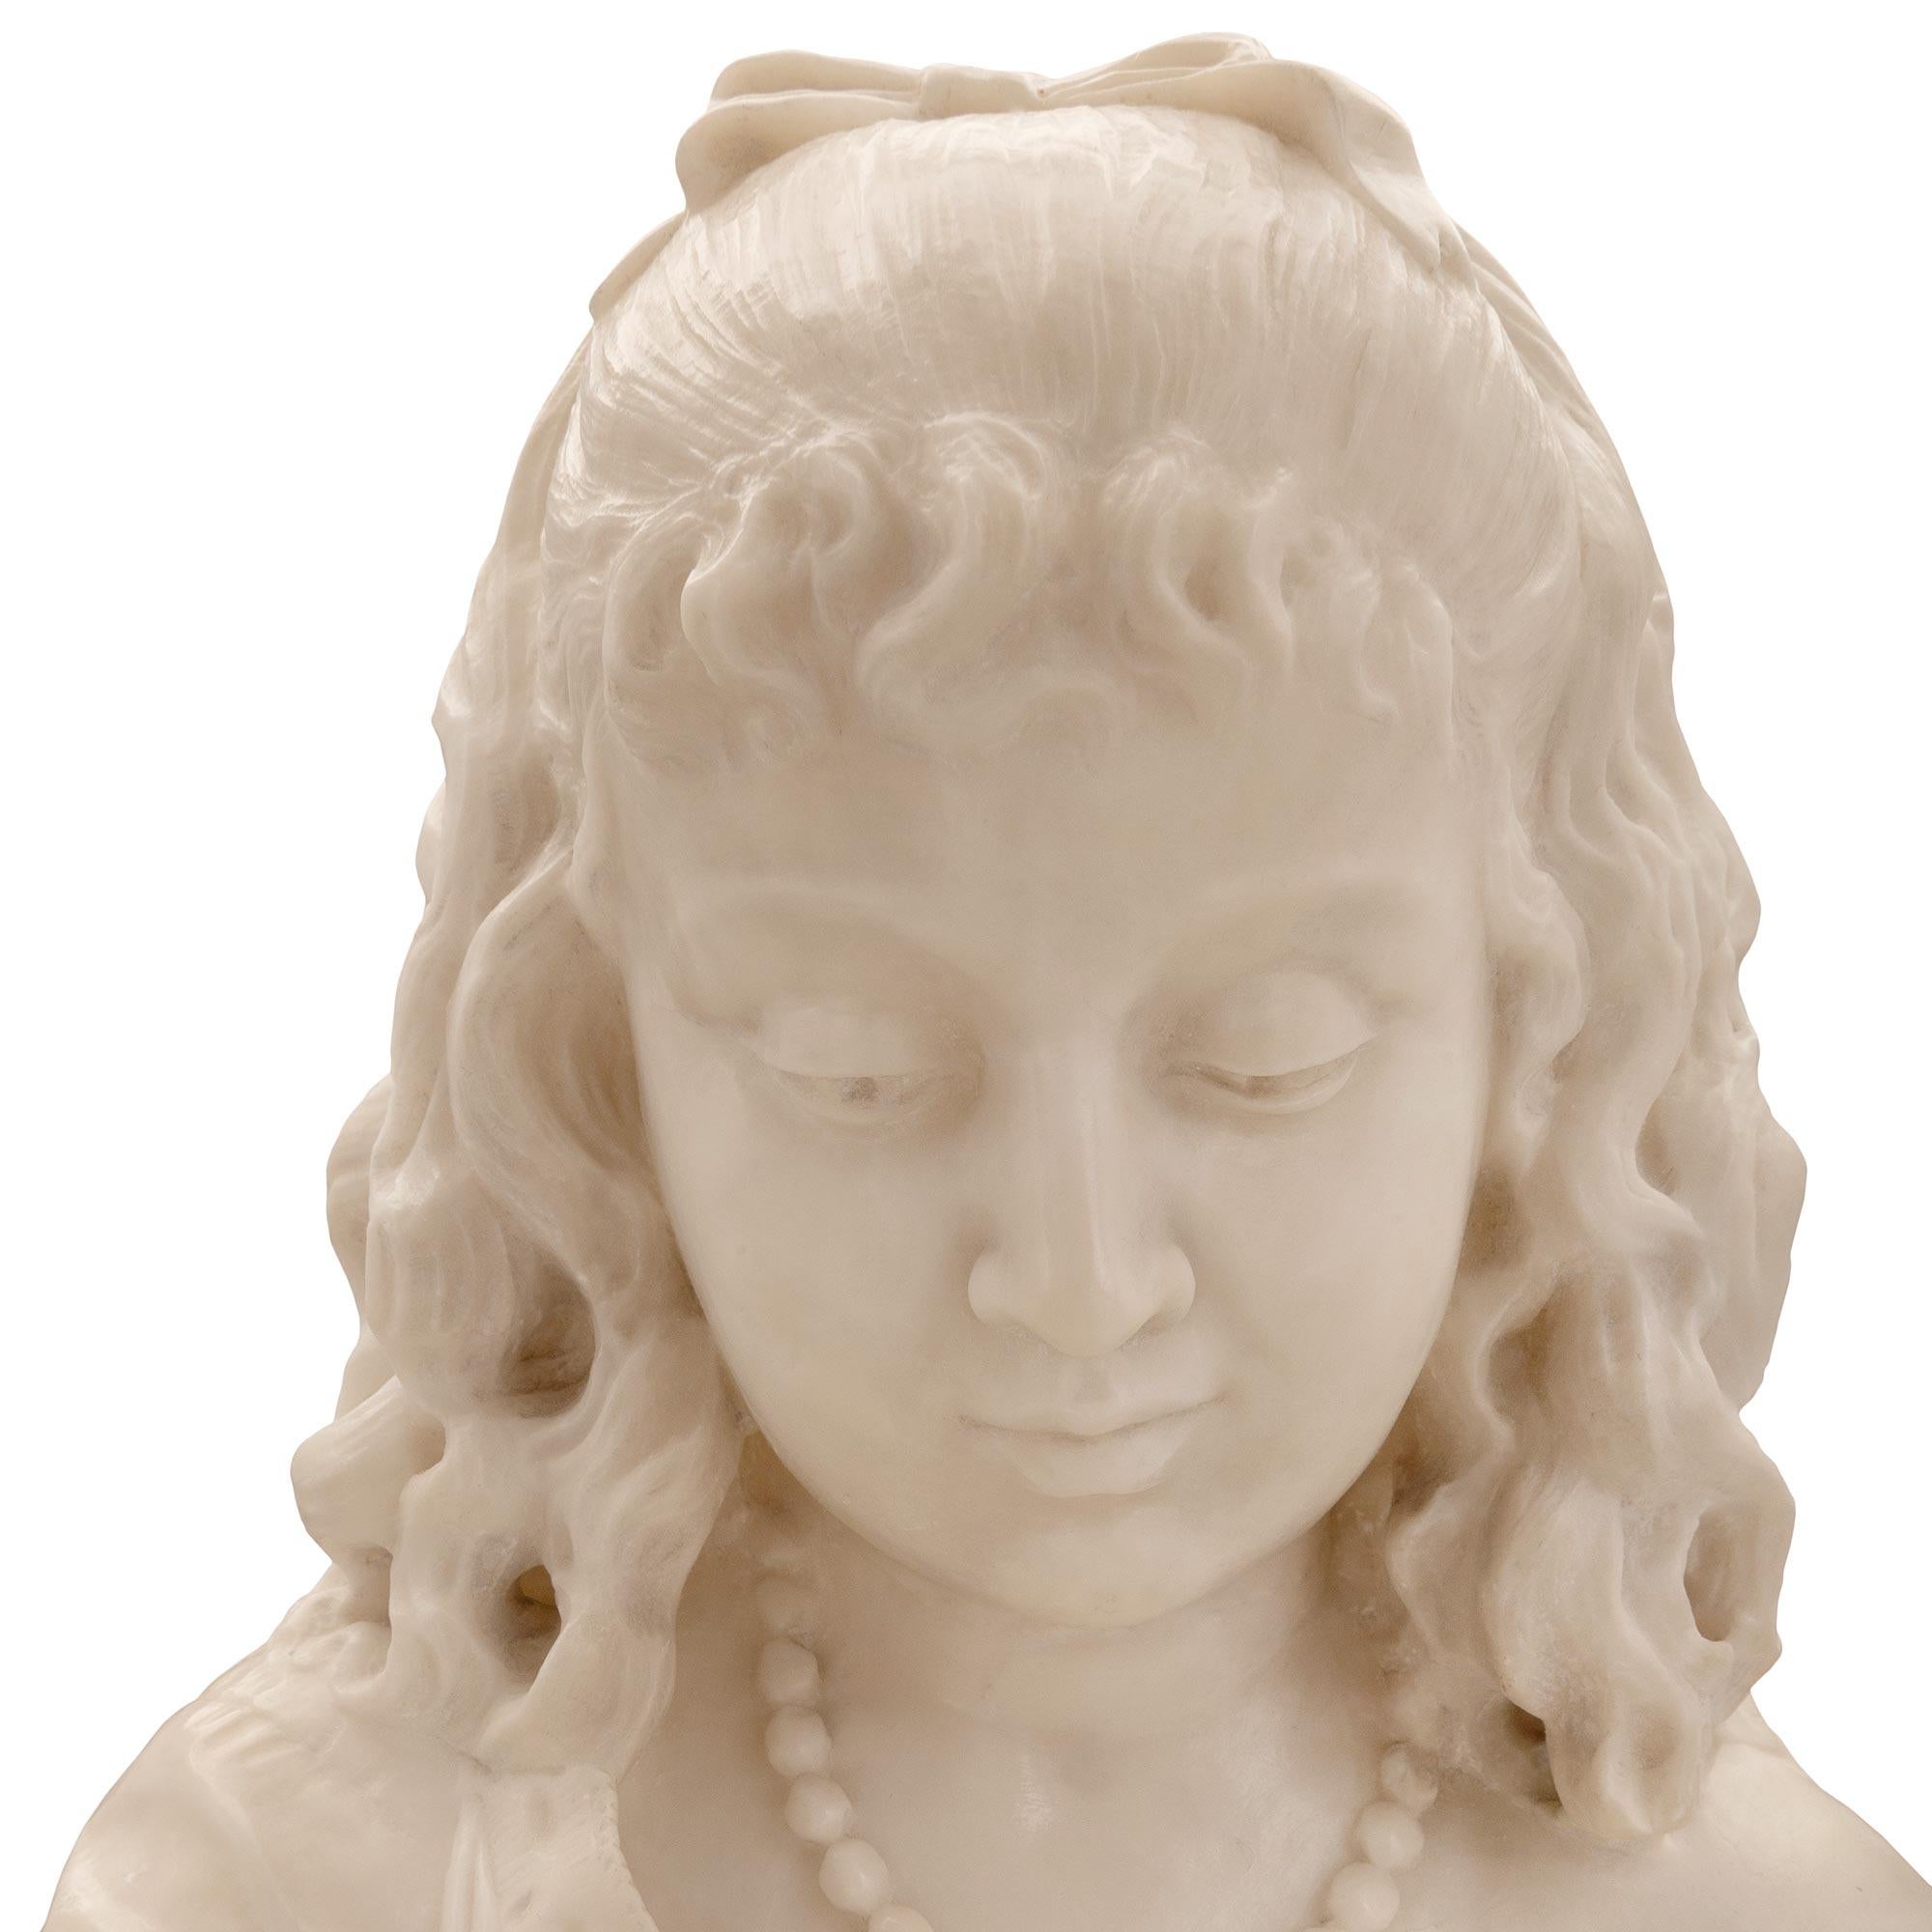 A stunning and extremely high quality Italian 19th century Alabaster statue of a young girl feeding birds. The statue is raised by an oblong base with a lovely paved ground like design where a charming finely detailed bird is eating grains off the